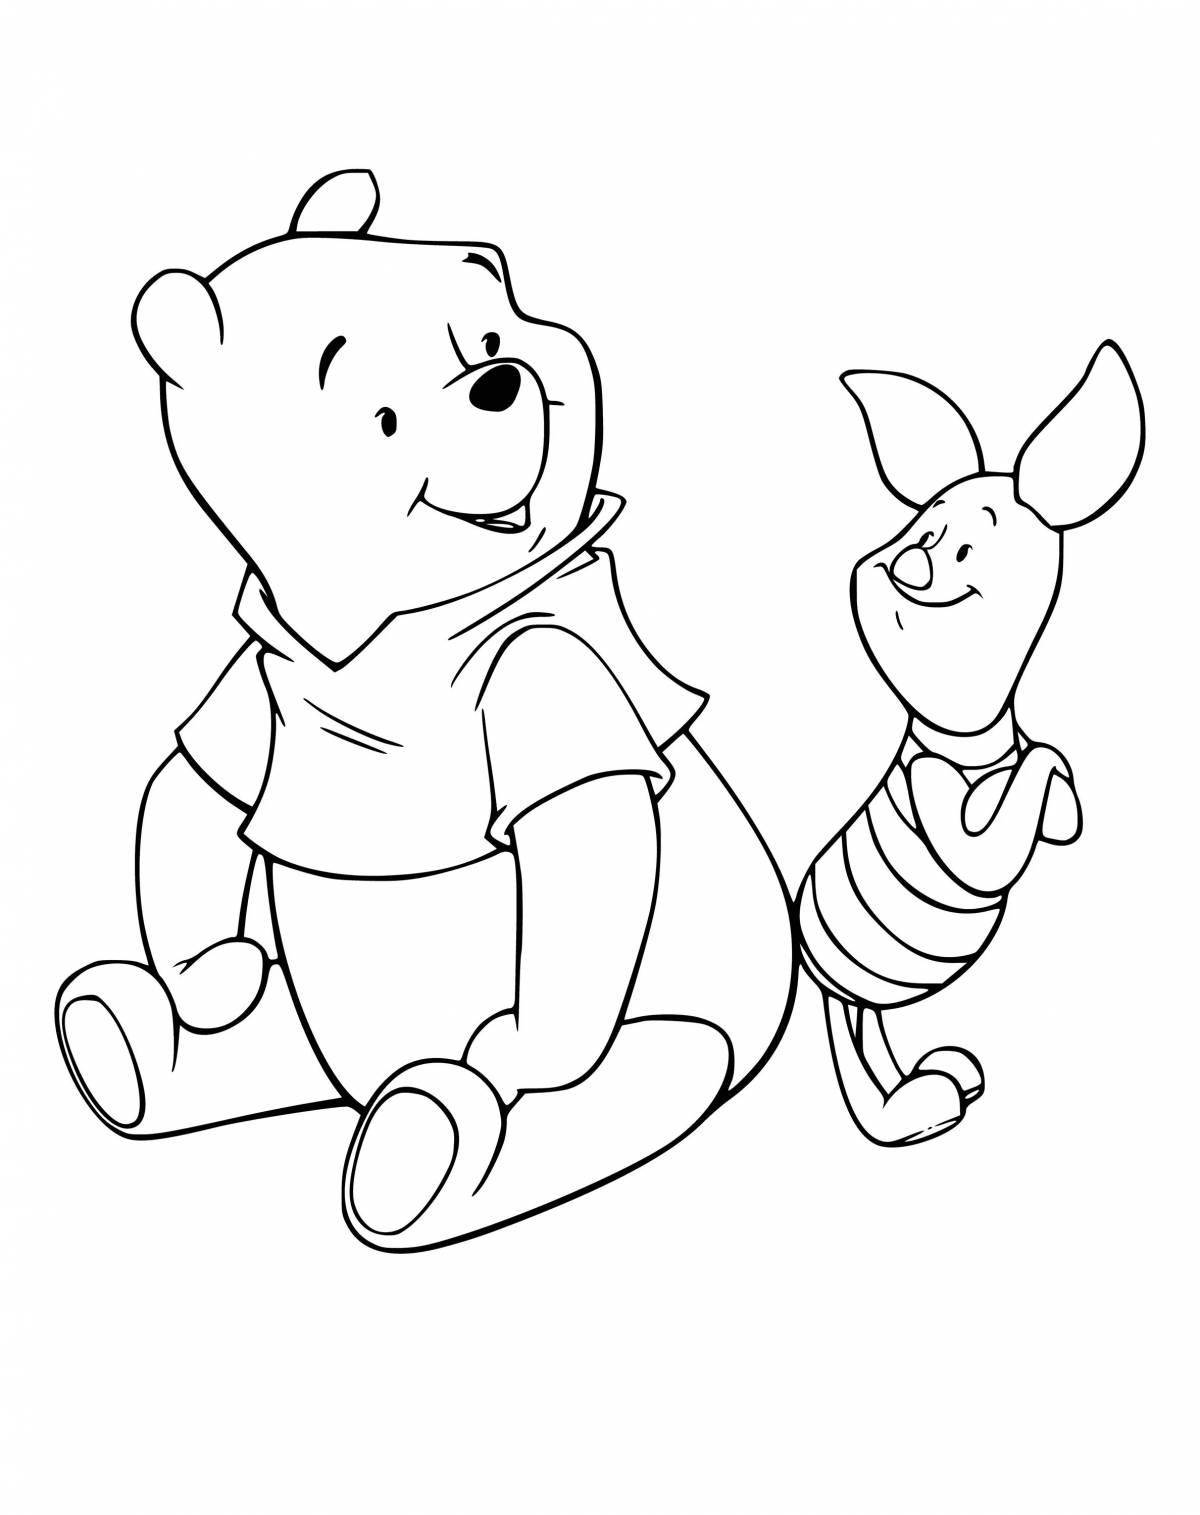 Coloring cute winnie the pooh